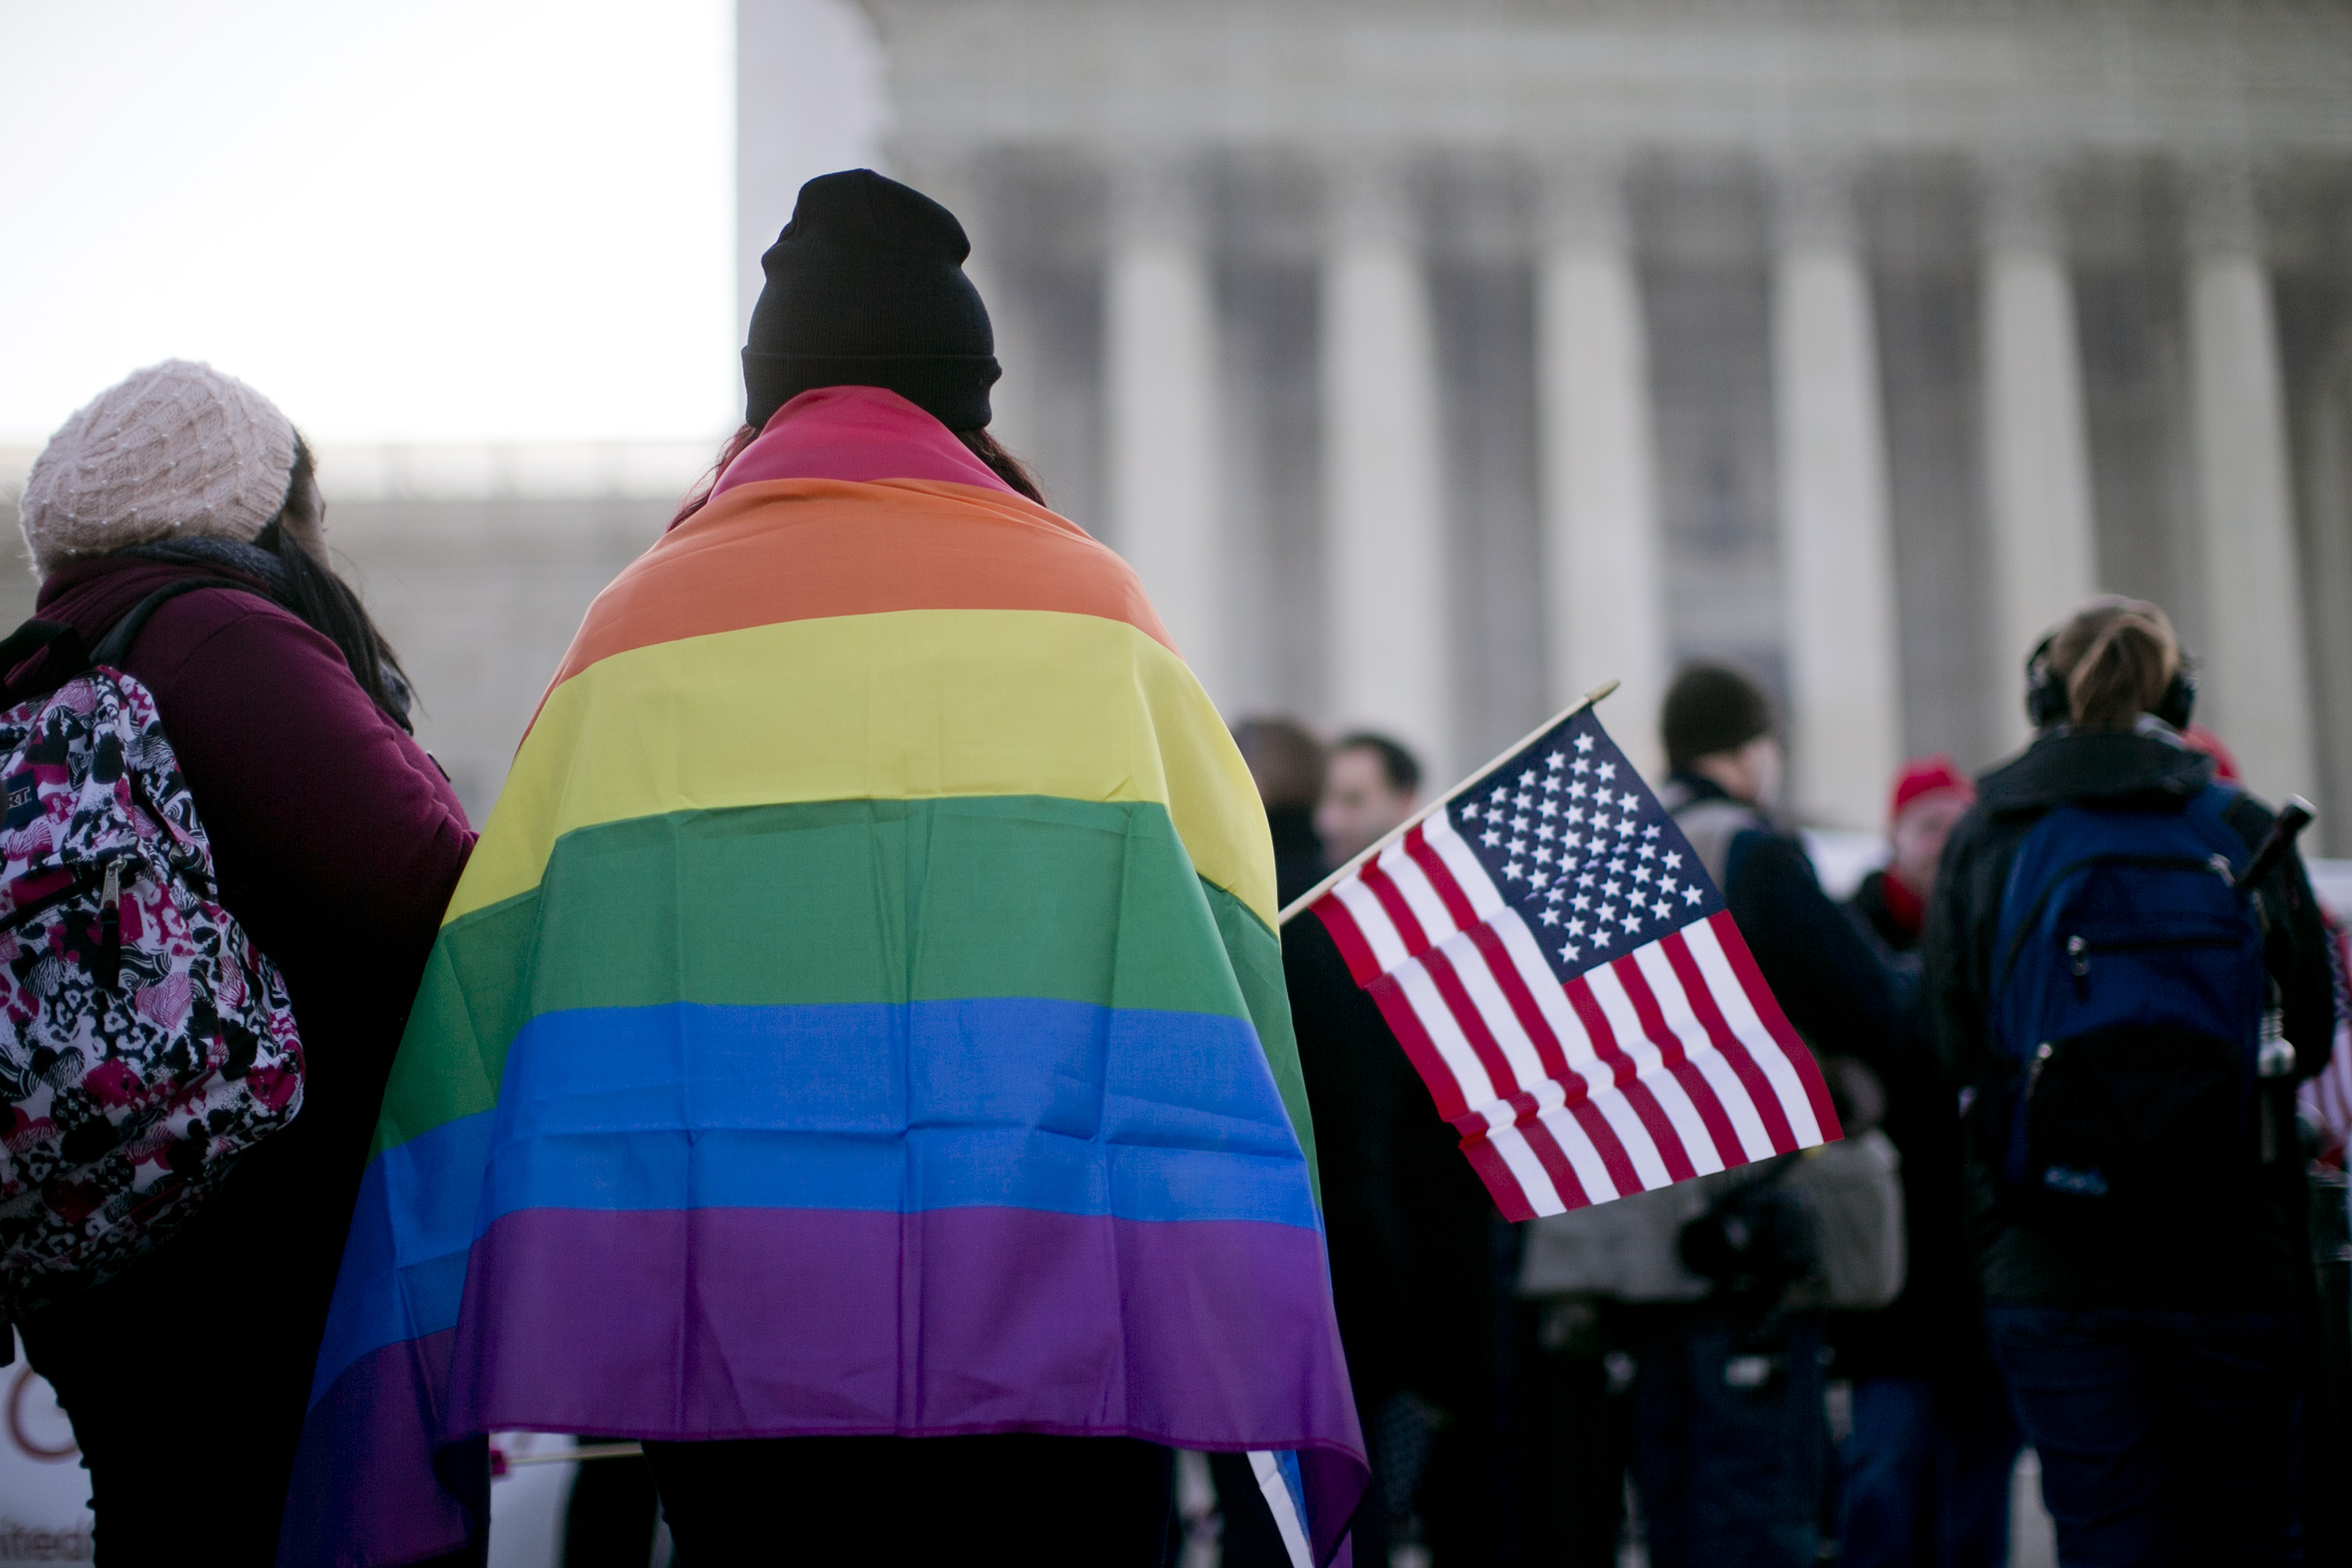 A supporter of same-sex marriage wears a rainbow flag in front of the U.S. Supreme Court in Washington, D.C., U.S., on  March 26, 2013. (Bloomberg via Getty Images)